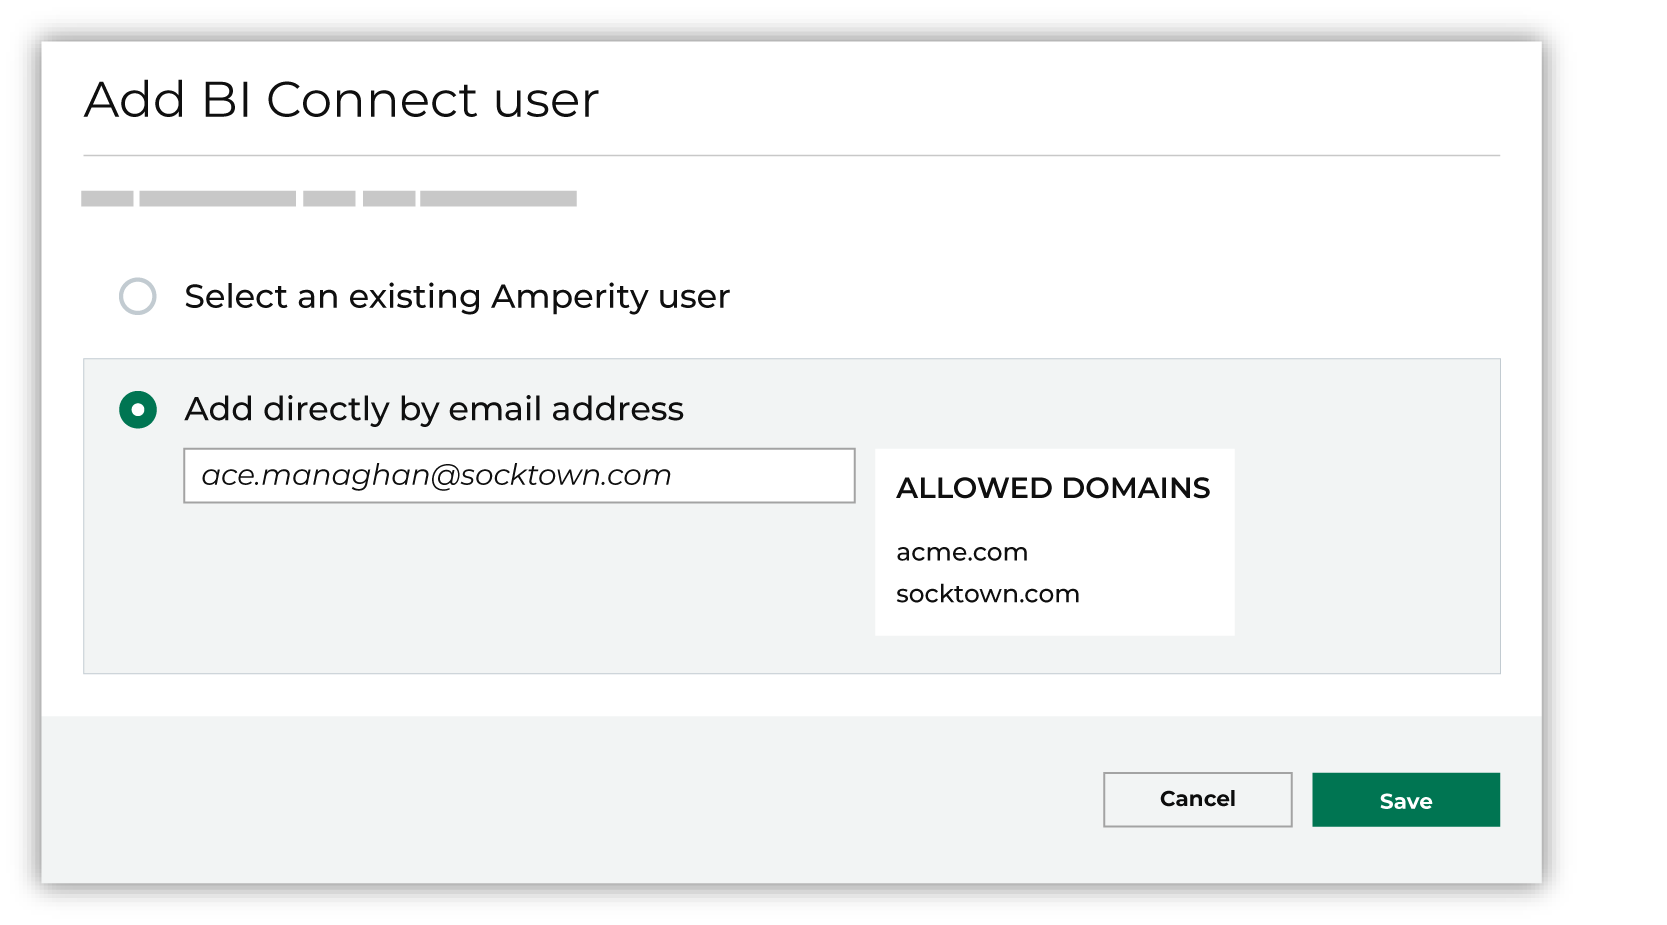 Add Amperity users to BI Connect directly.